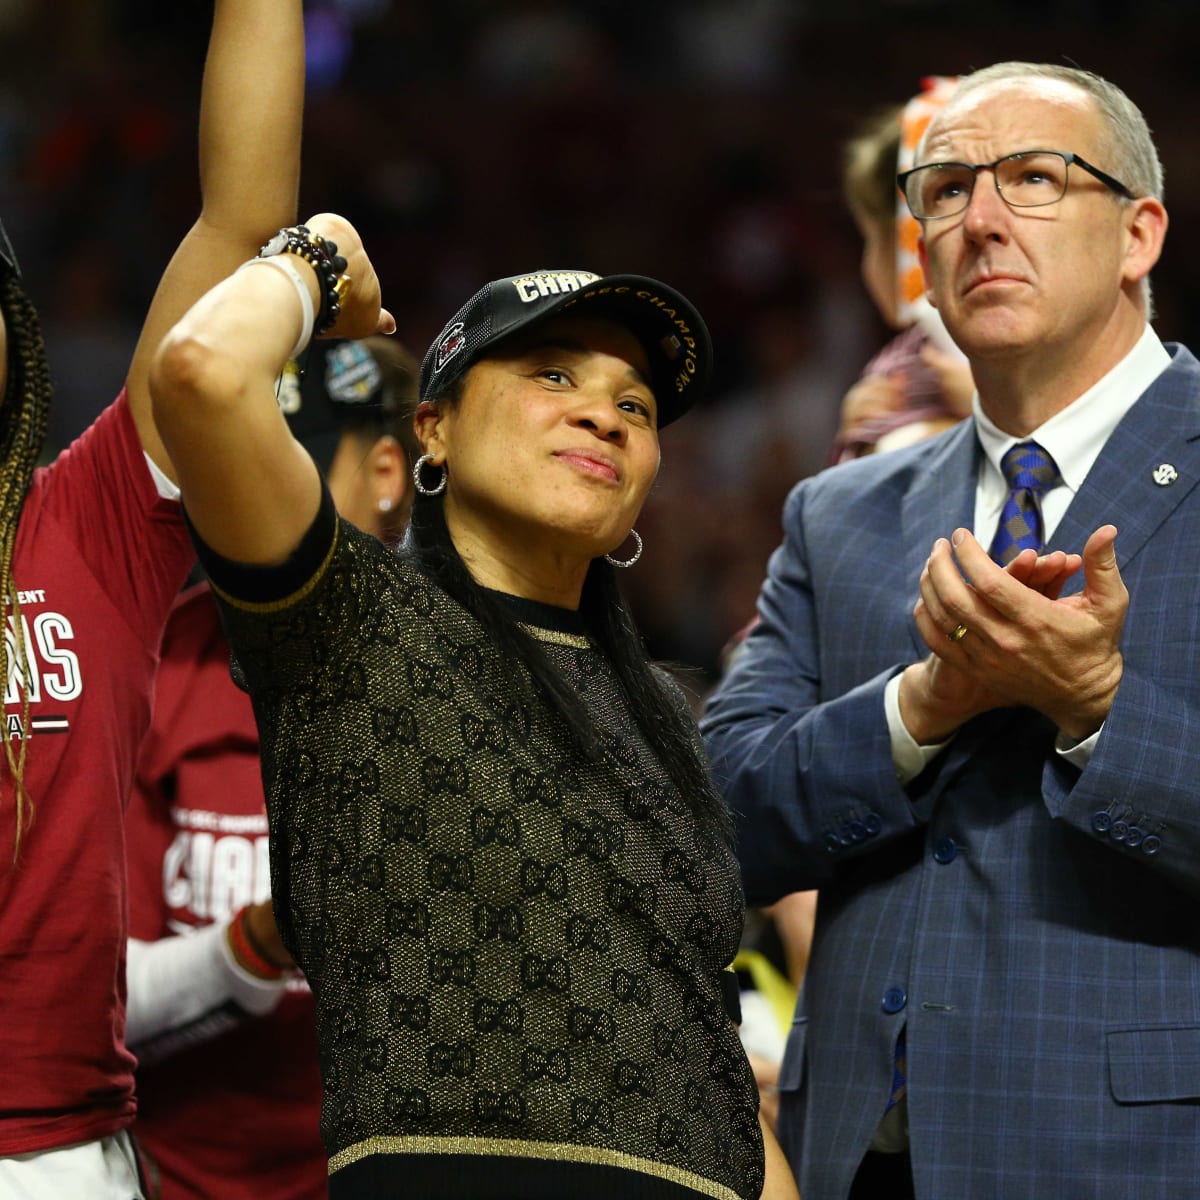 Will Dawn Staley Coach Basketball at the Tokyo Olympics?